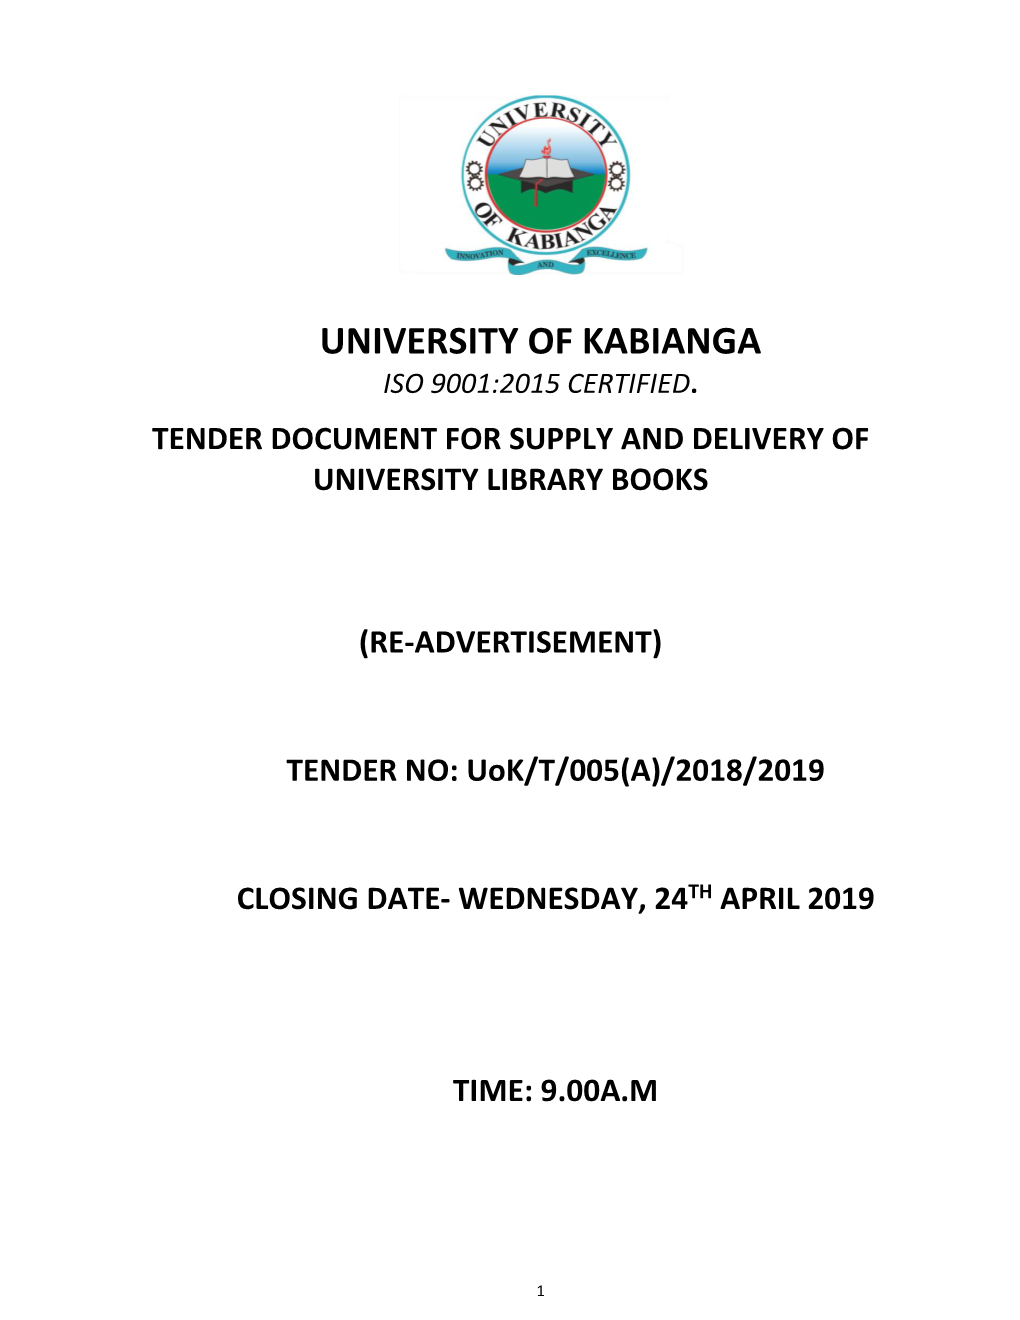 Tender Document for Supply and Delivery of University Library Books